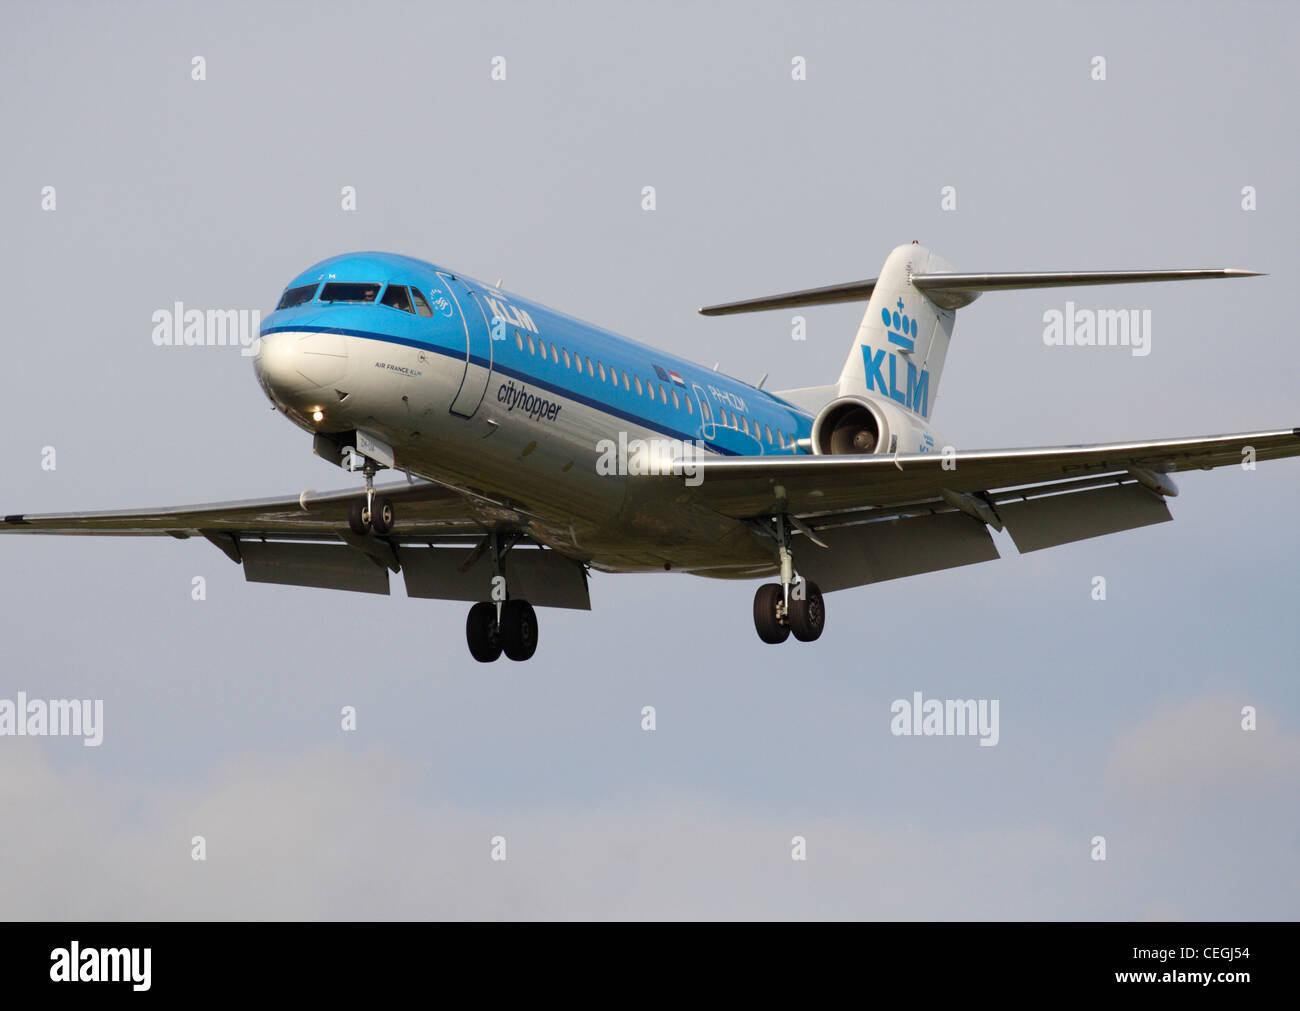 KLM Cityhopper Fokker 70 regional jet airliner on final approach. Close up front view. Stock Photo